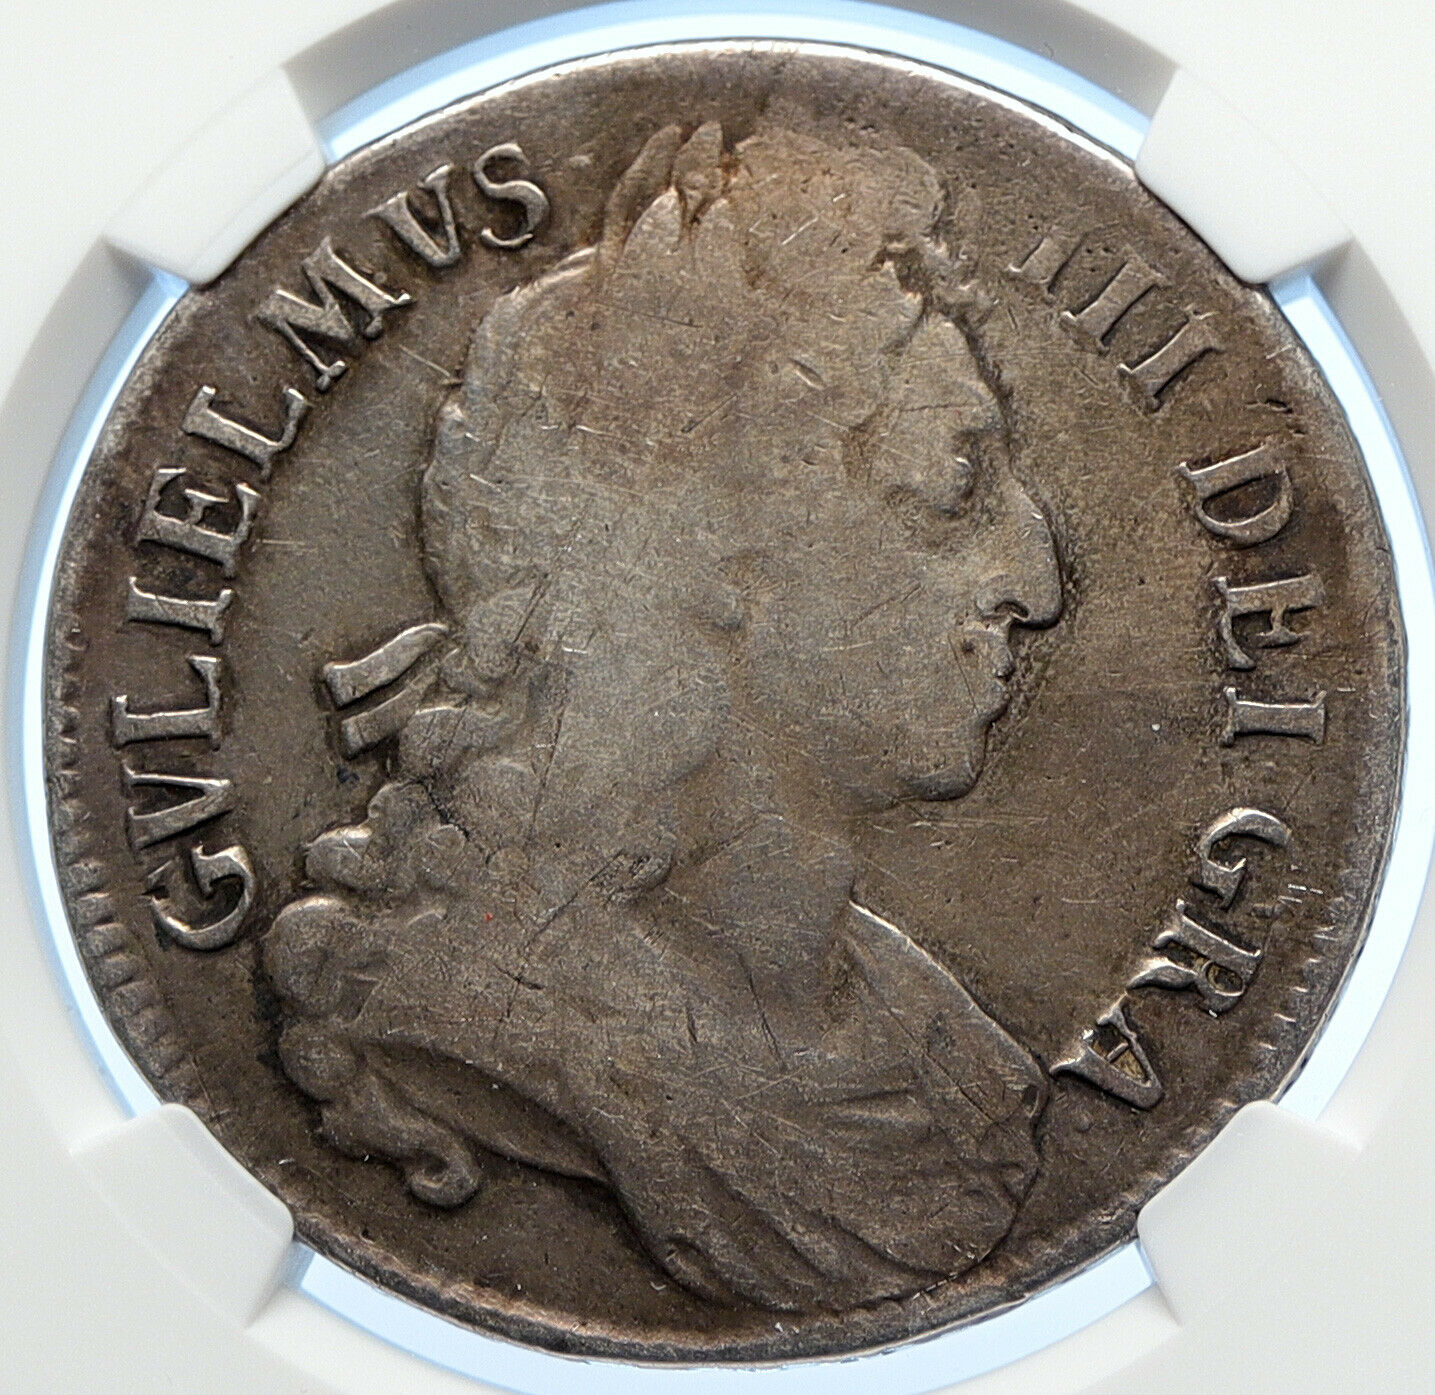 1696 UK Great Britain KING WILLIAM III Genuine Old Silver Crown Coin NGC i106342